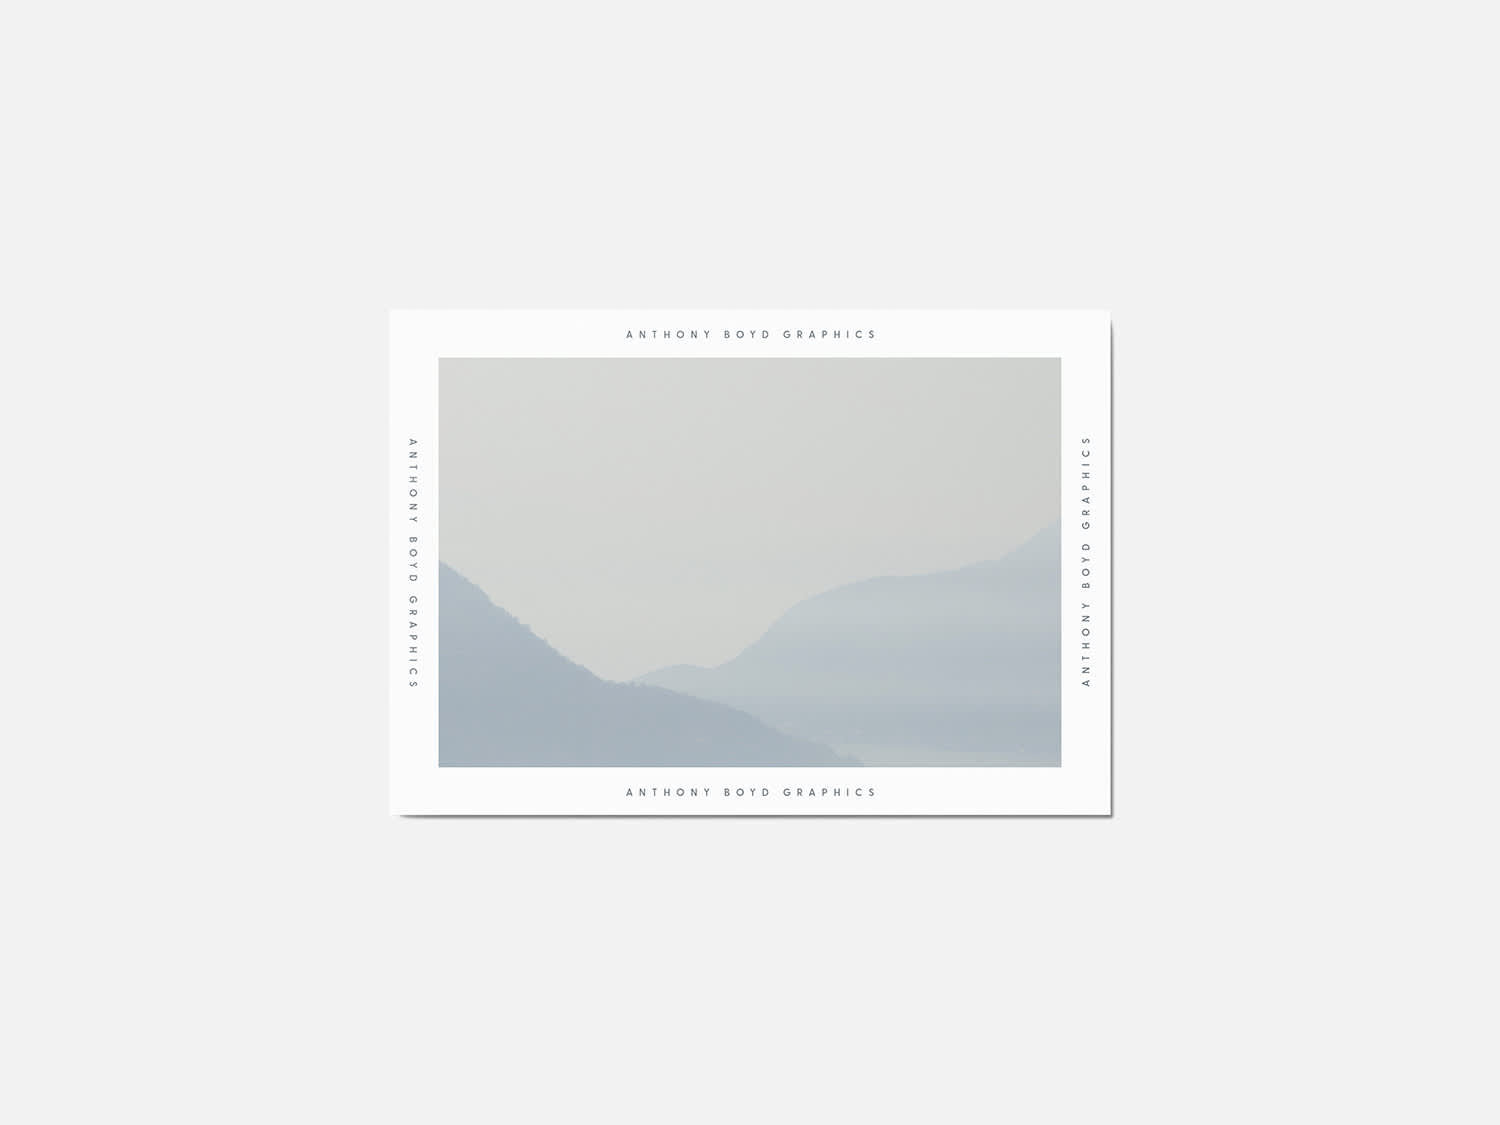 Postcard Mockup by Anthony Boyd Graphics